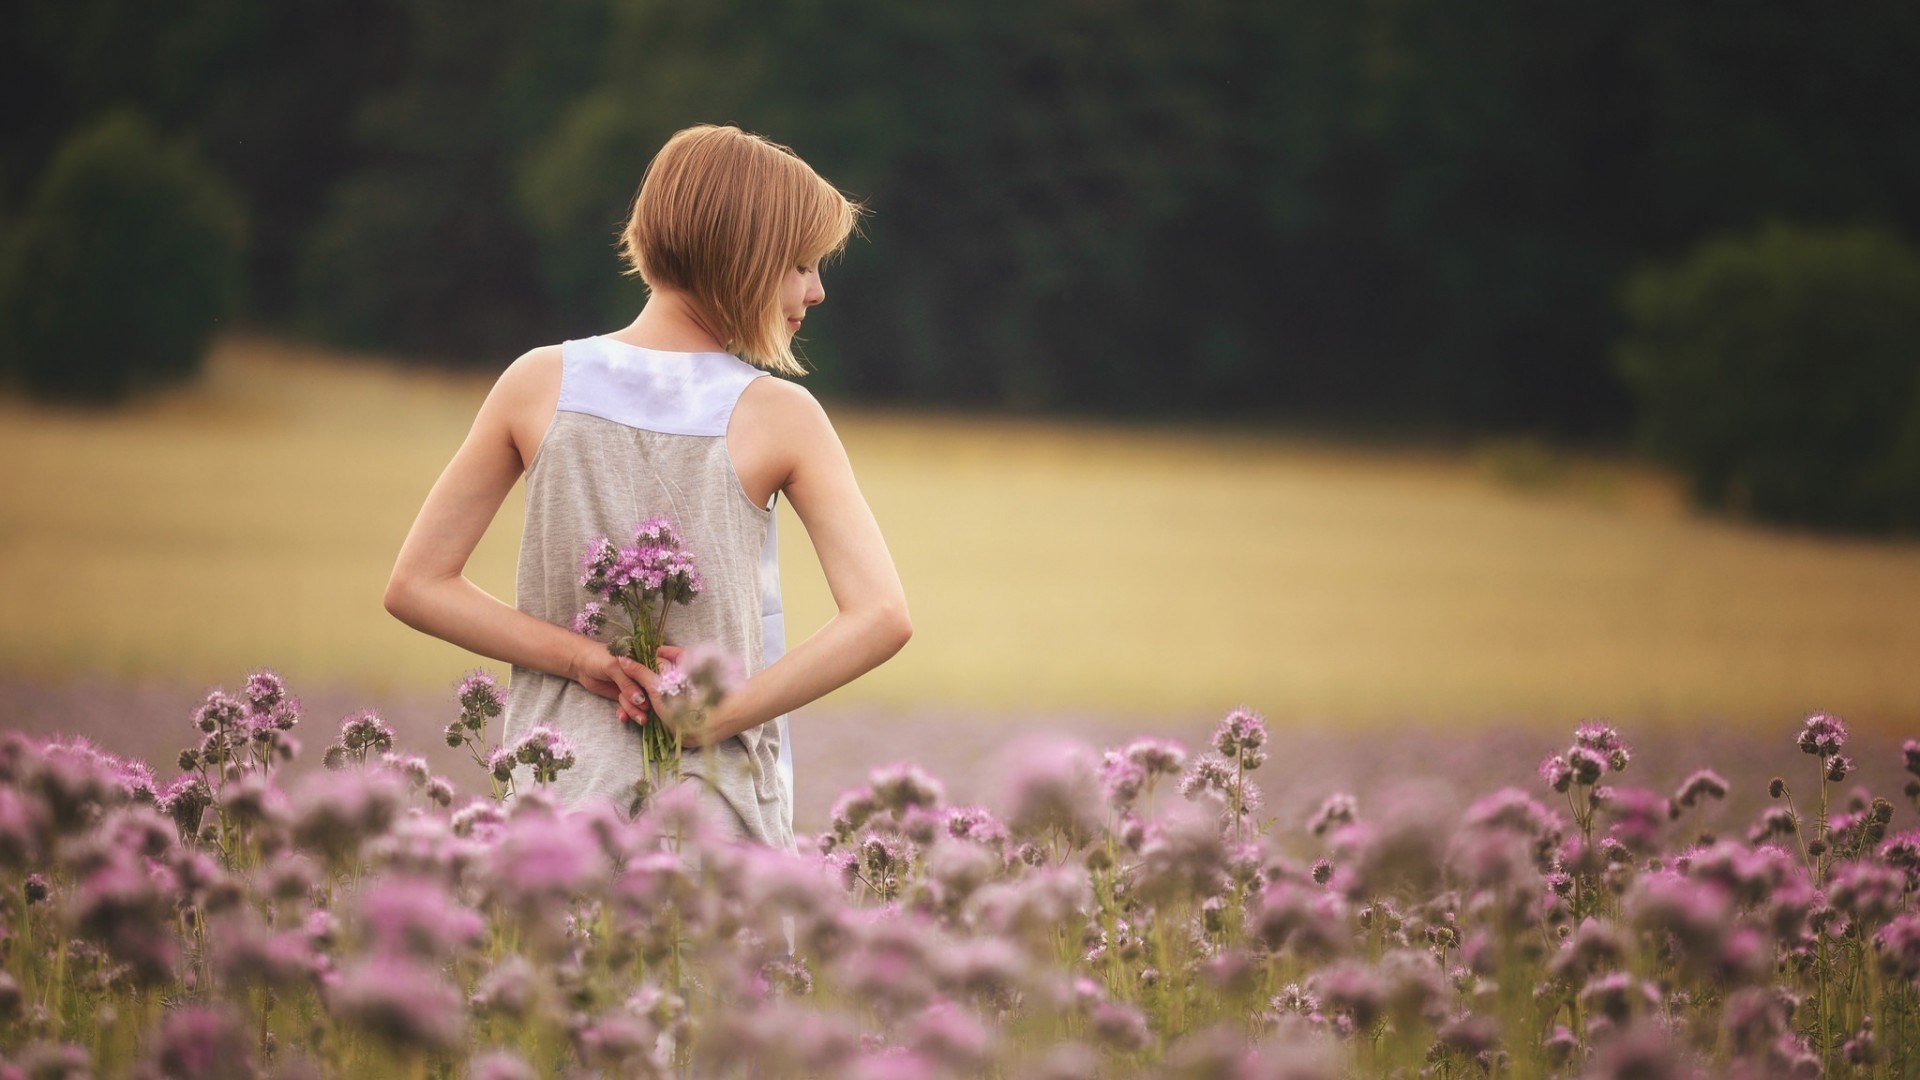 People 1920x1080 women model blonde women outdoors nature field short hair rear view closed eyes white dress bare shoulders trees forest flowers depth of field plants translucent outdoors